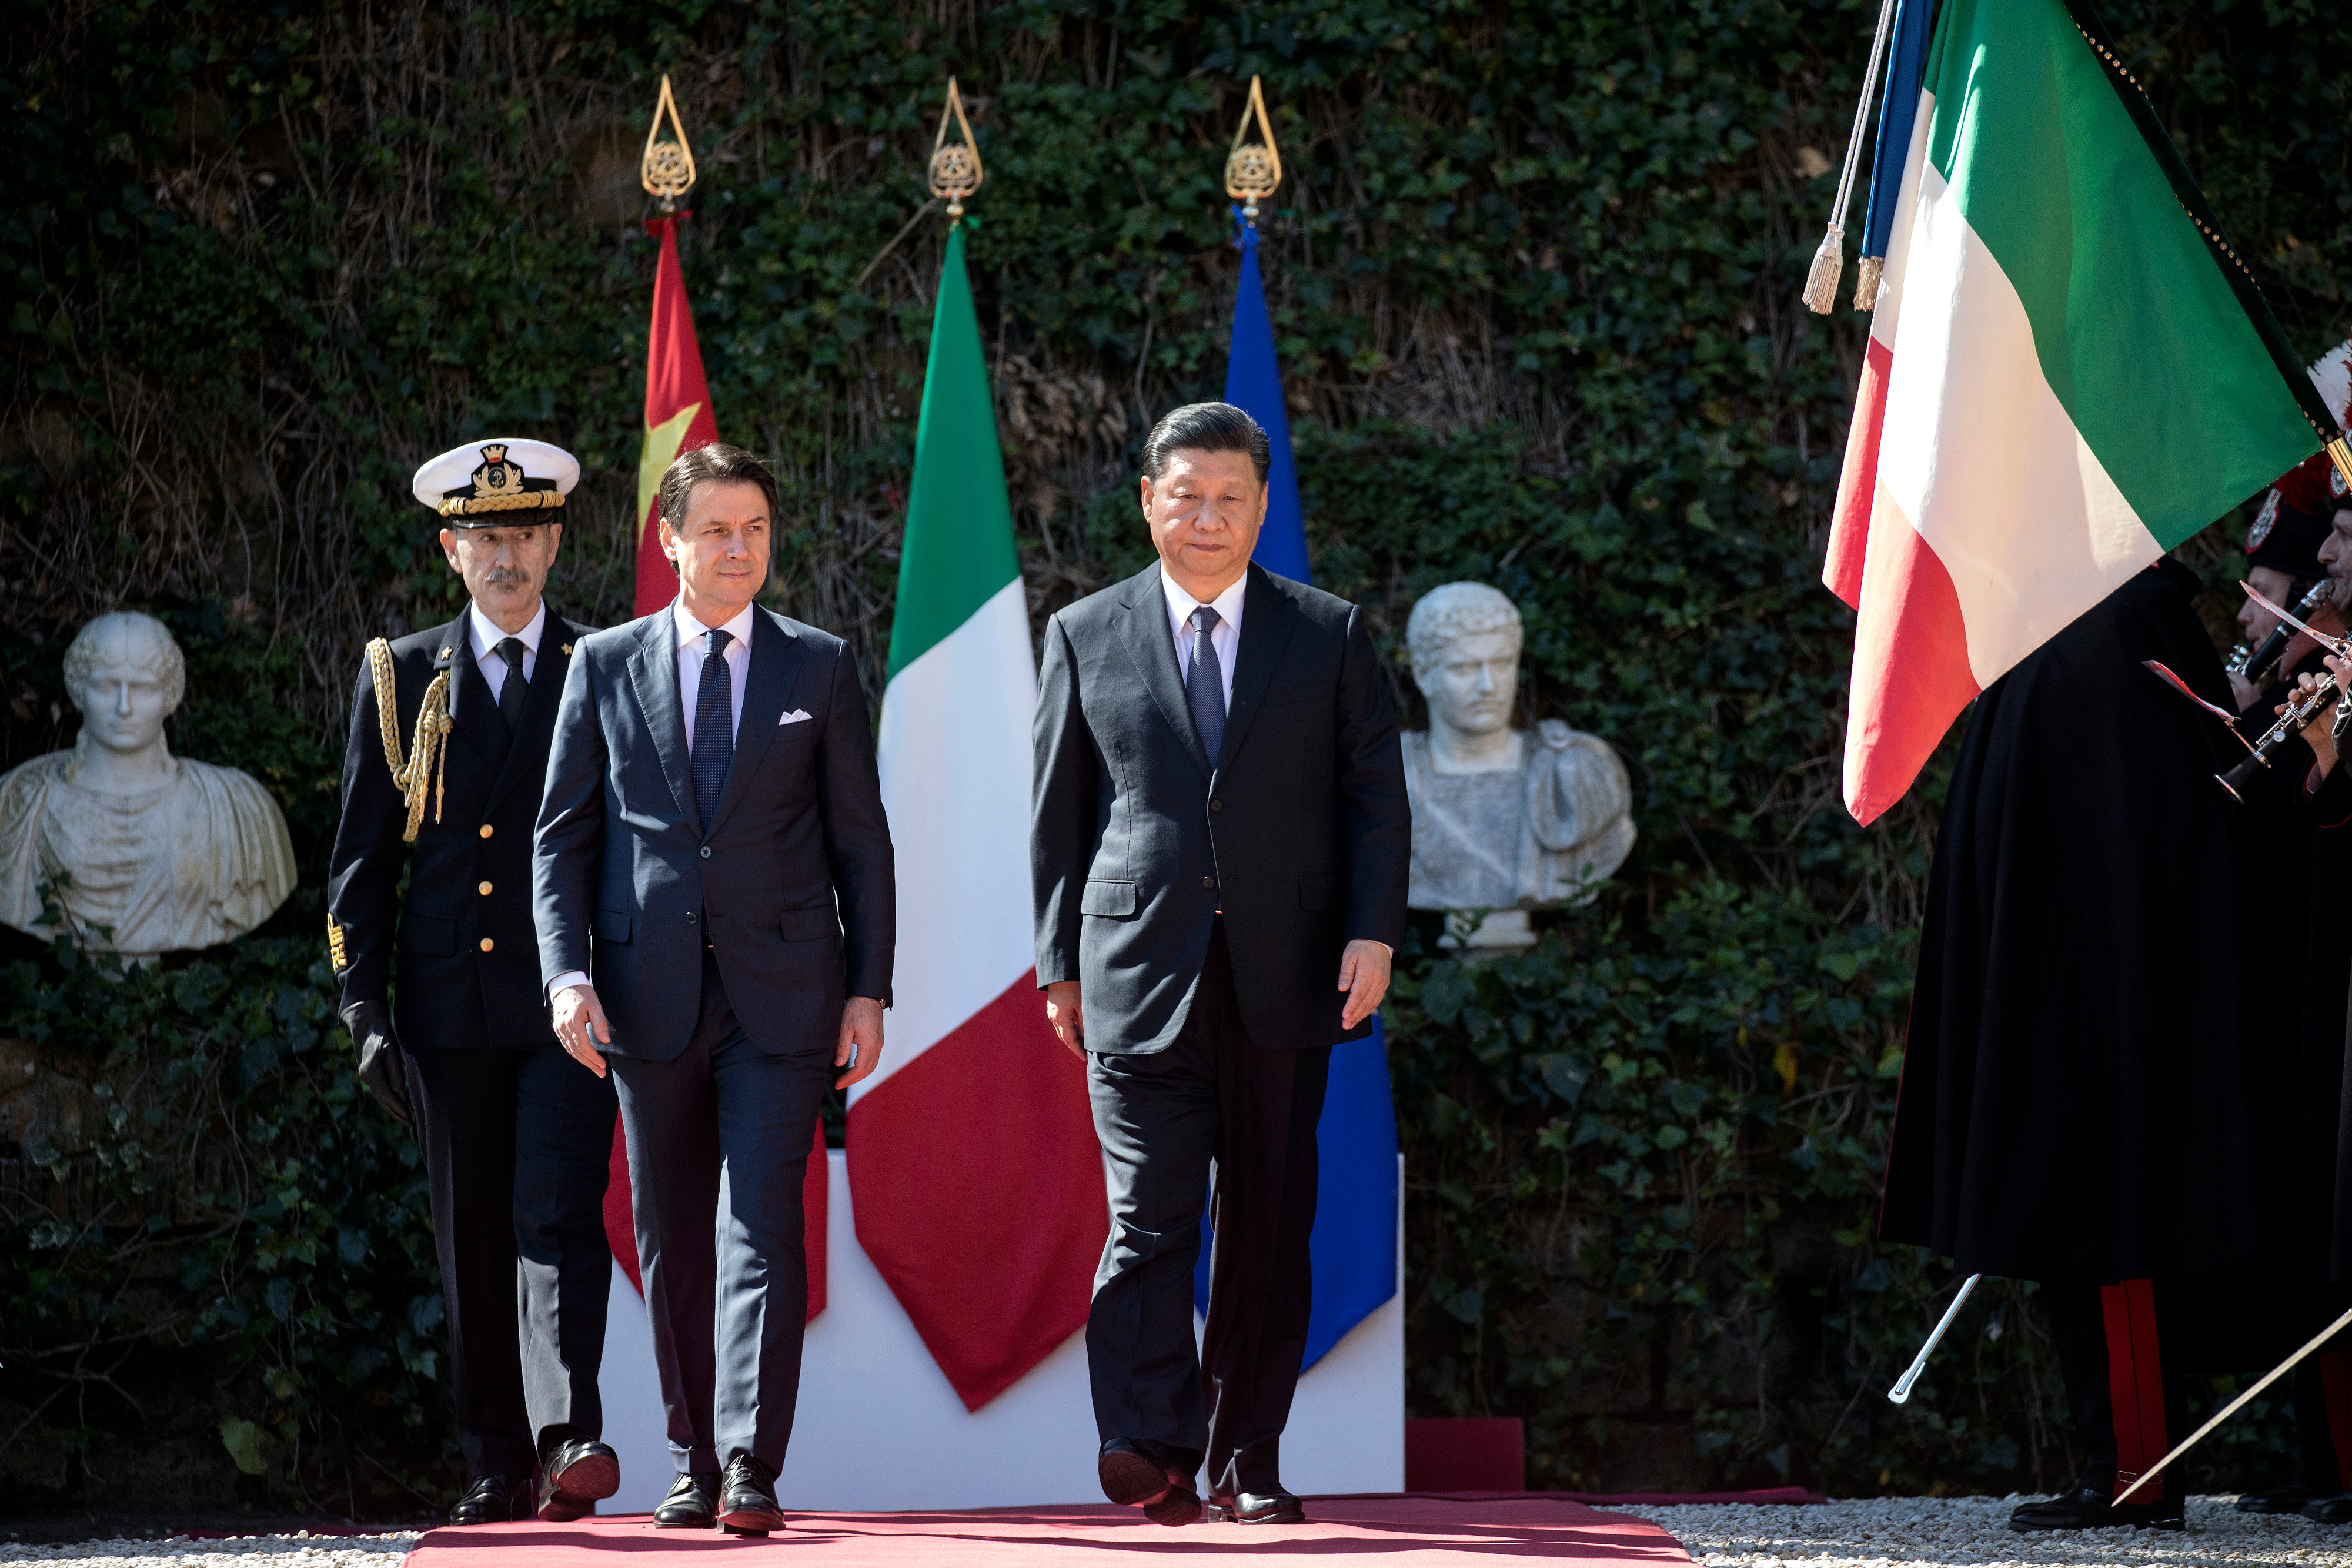 Xi Jinping and Italian Premier at signing of trade deal